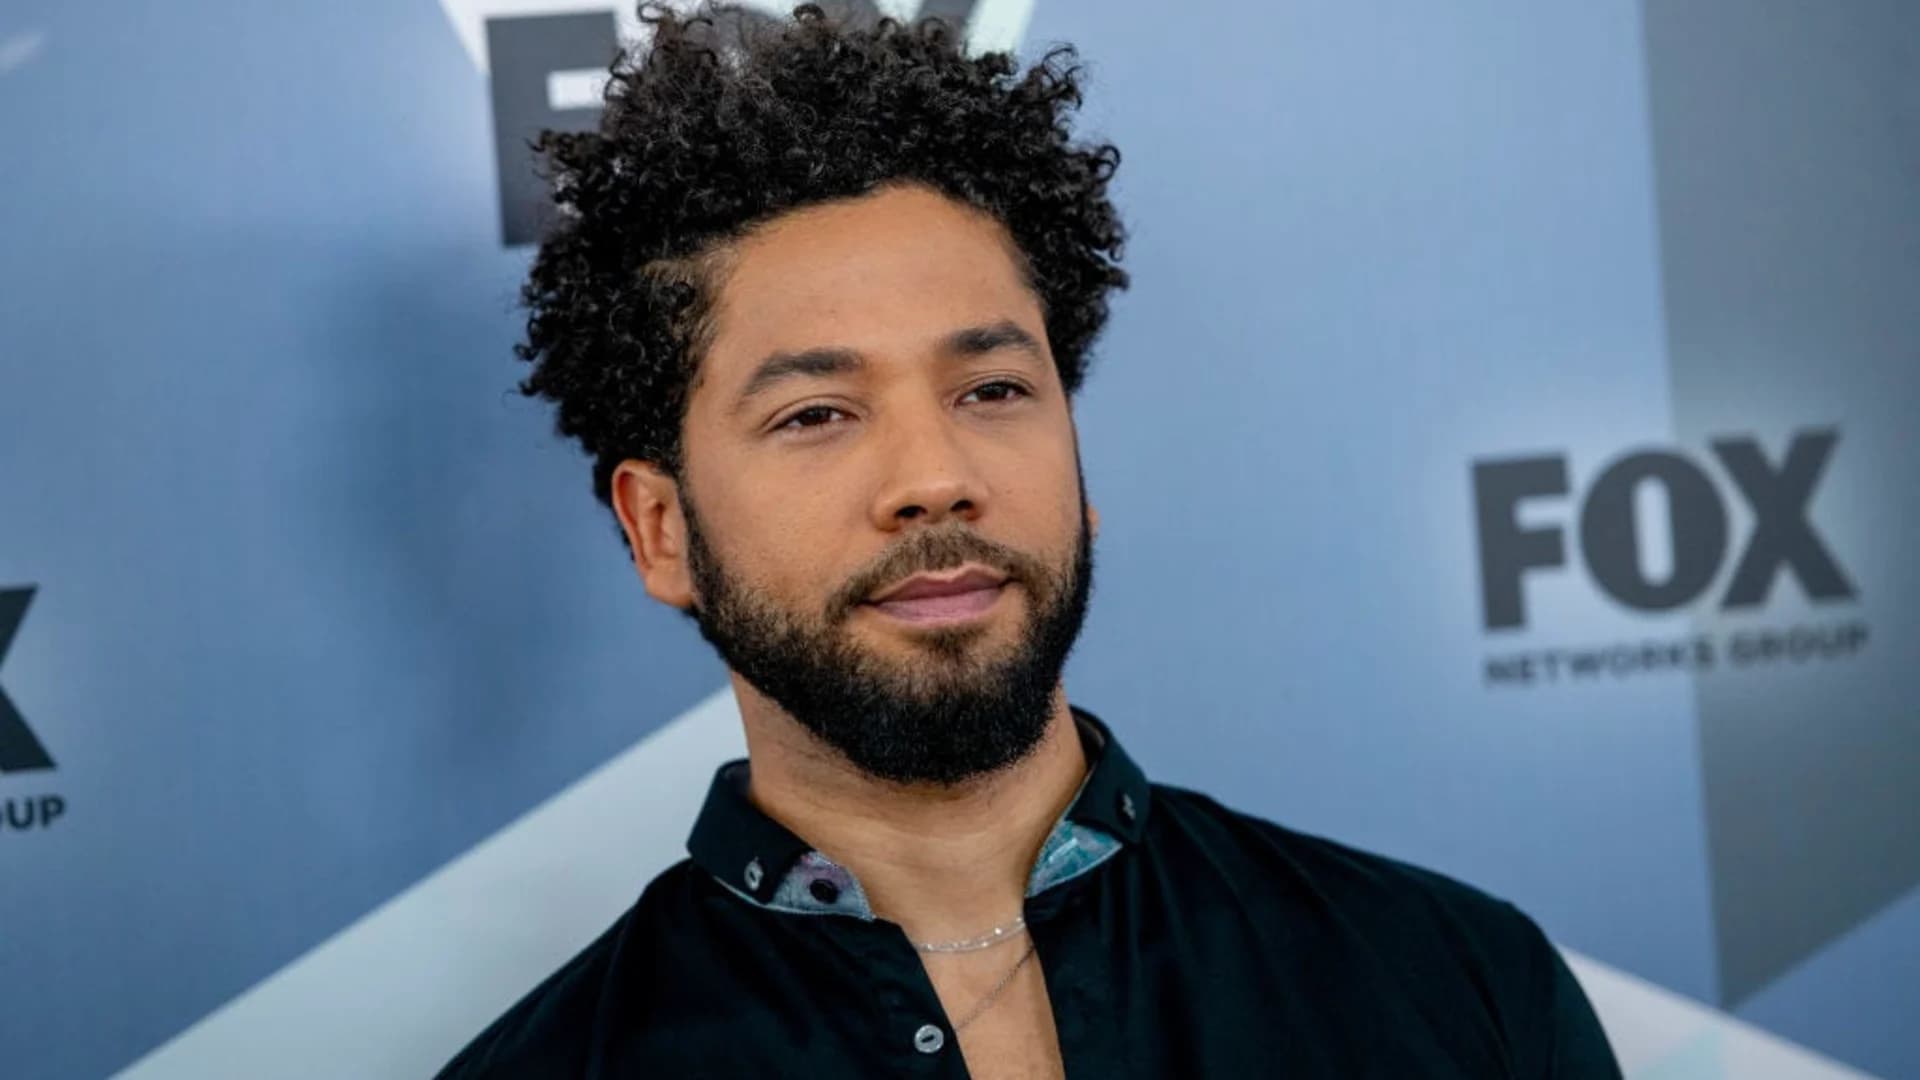 Jussie Smollett's attorneys say all criminal charges dropped